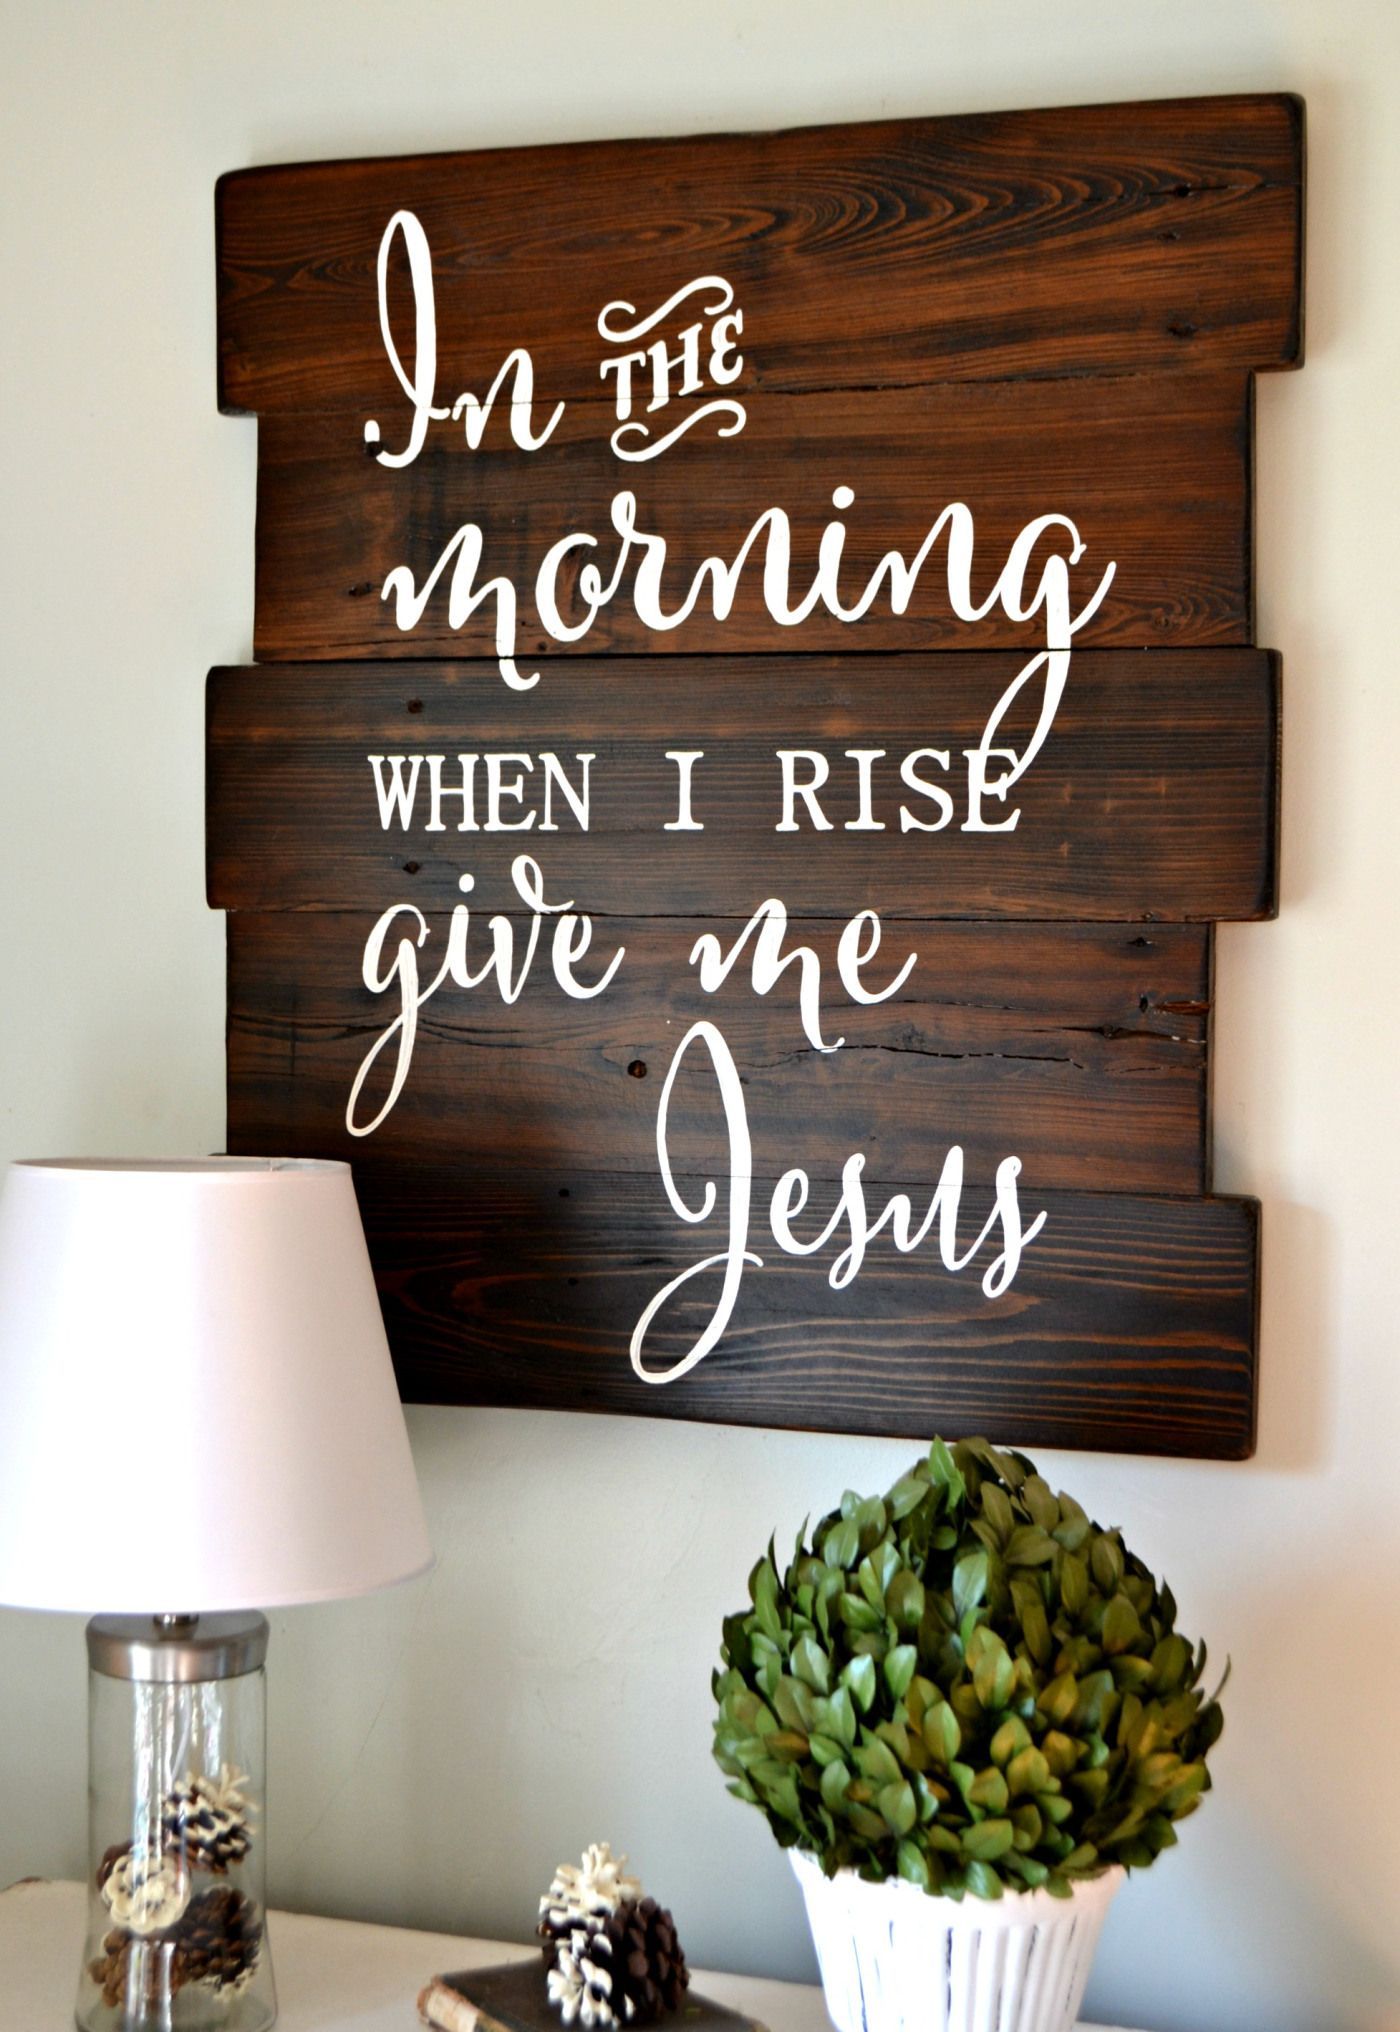 We absolutely adore this. What a great reminder to keep in the bedroom.